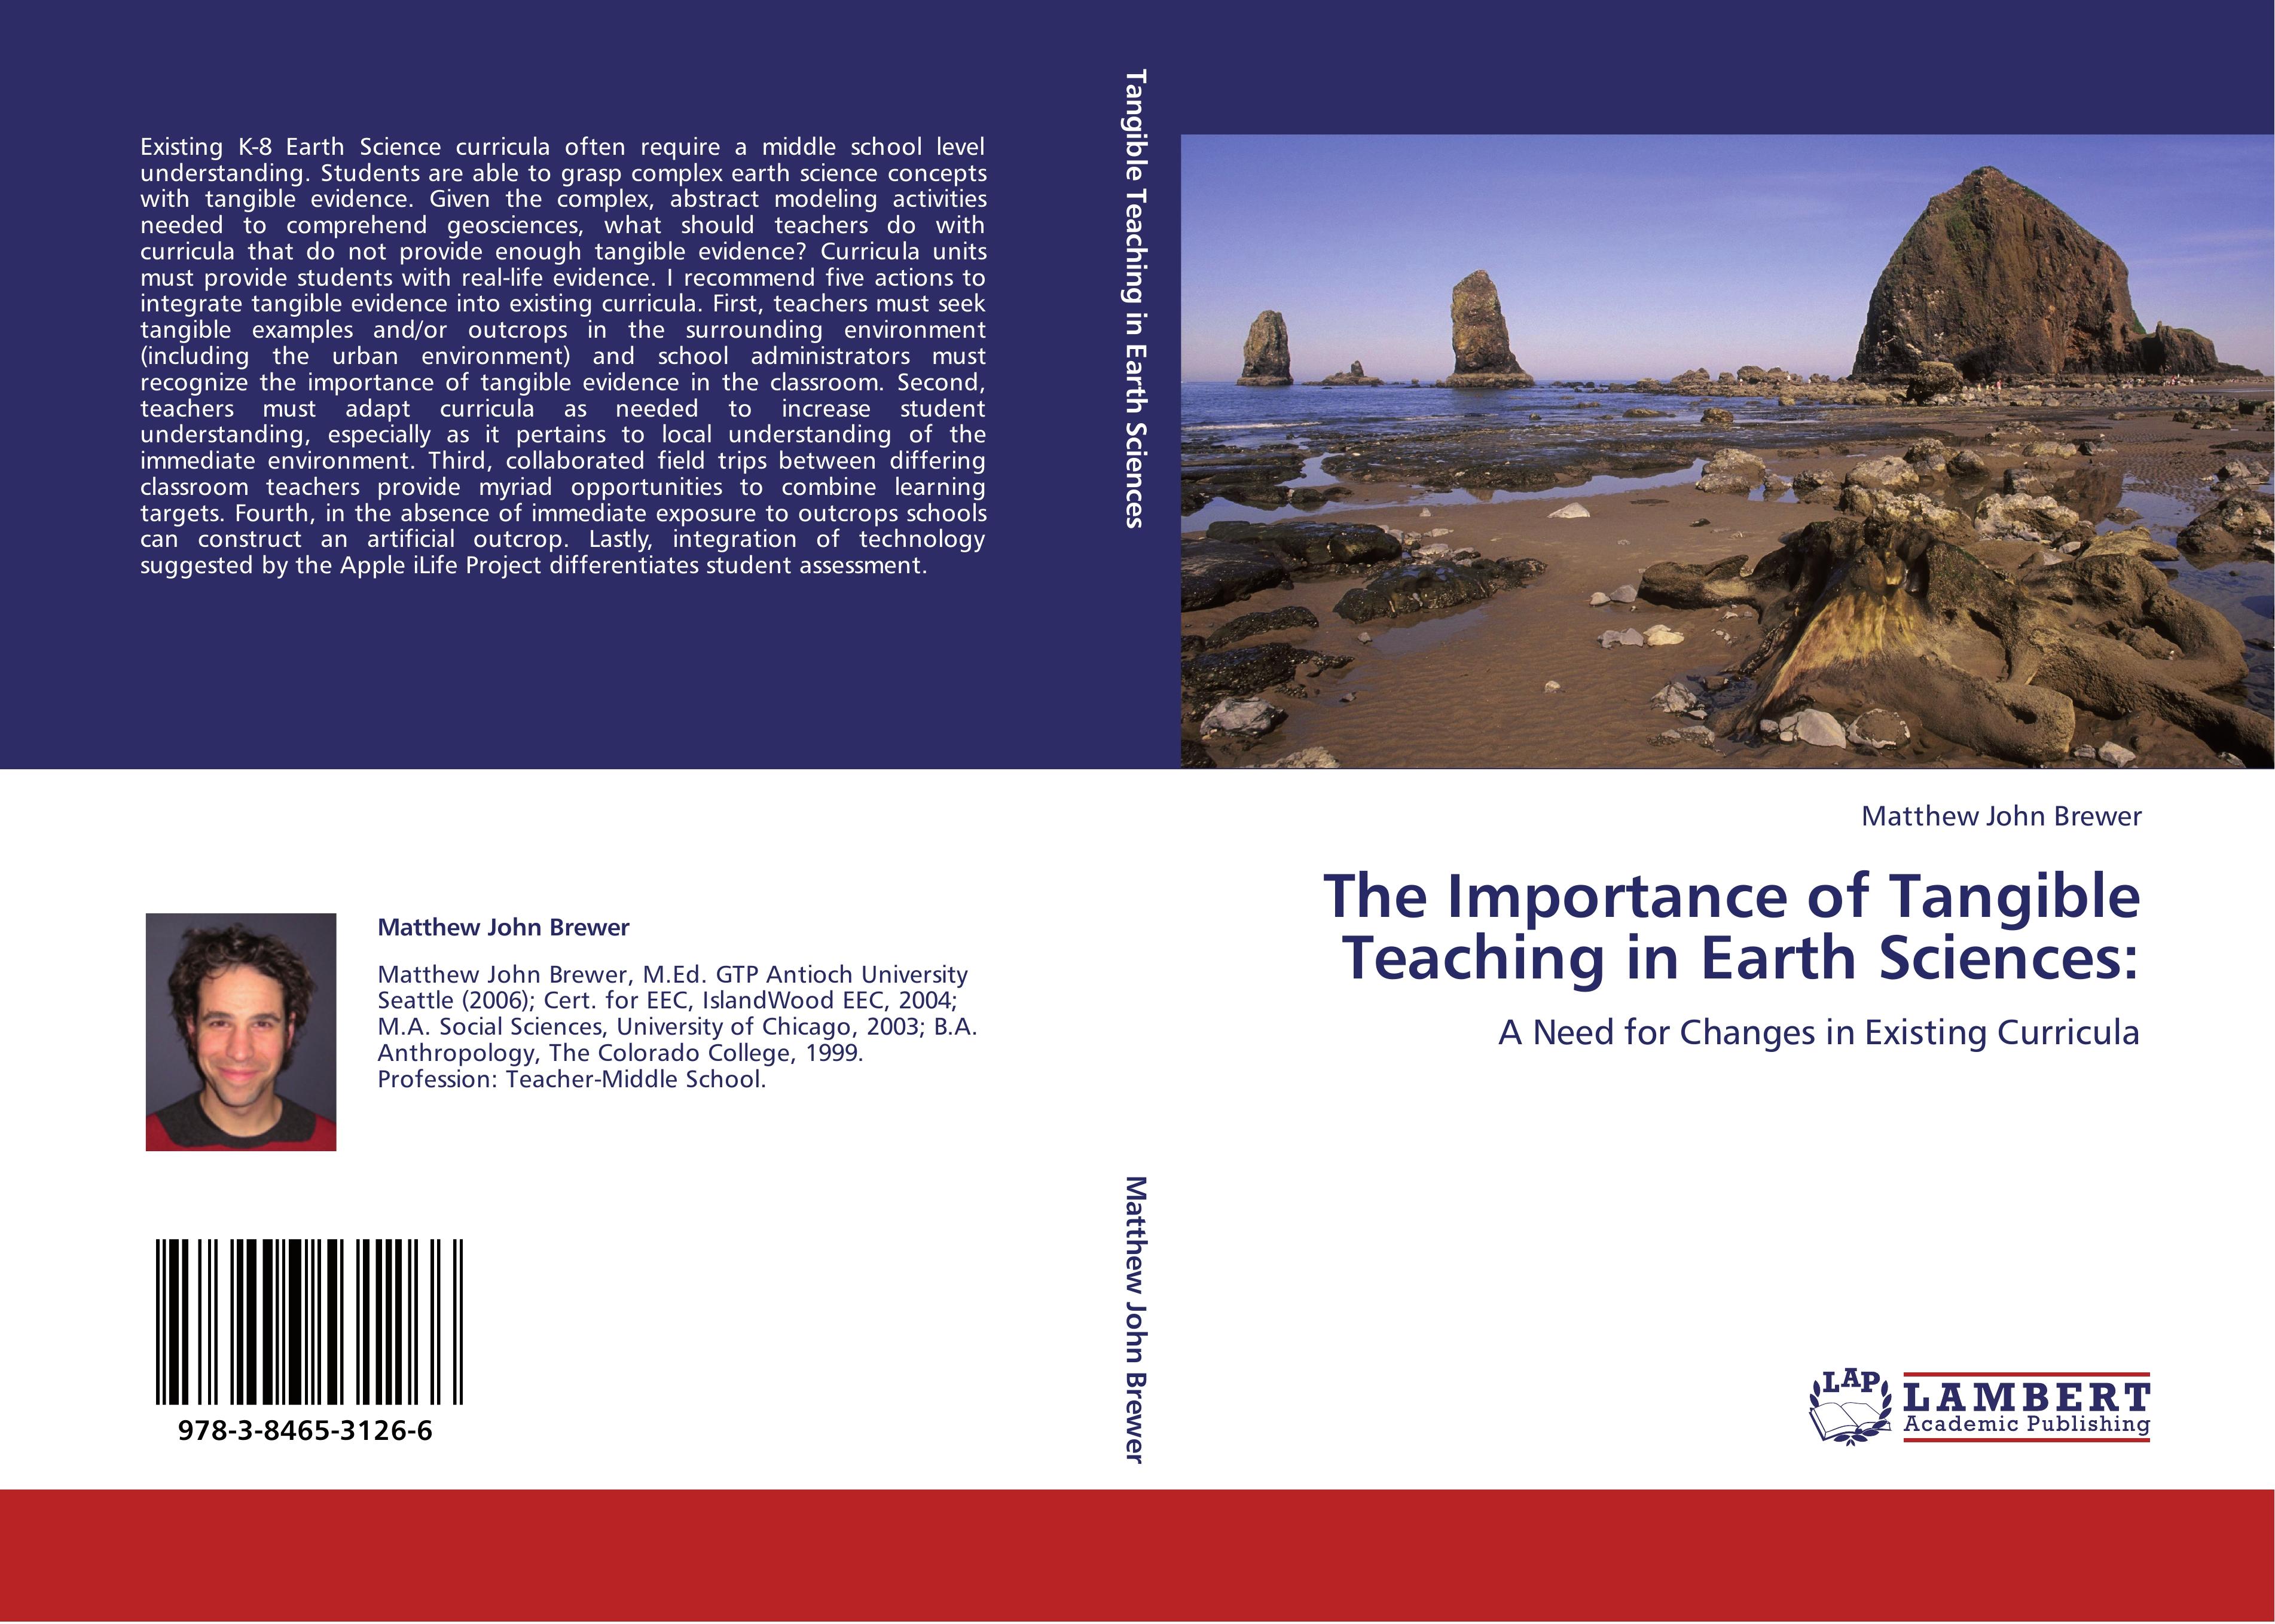 The Importance of Tangible Teaching in Earth Sciences: | A Need for Changes in Existing Curricula | Matthew John Brewer | Taschenbuch | Paperback | 204 S. | Englisch | 2011 | EAN 9783846531266 - Brewer, Matthew John